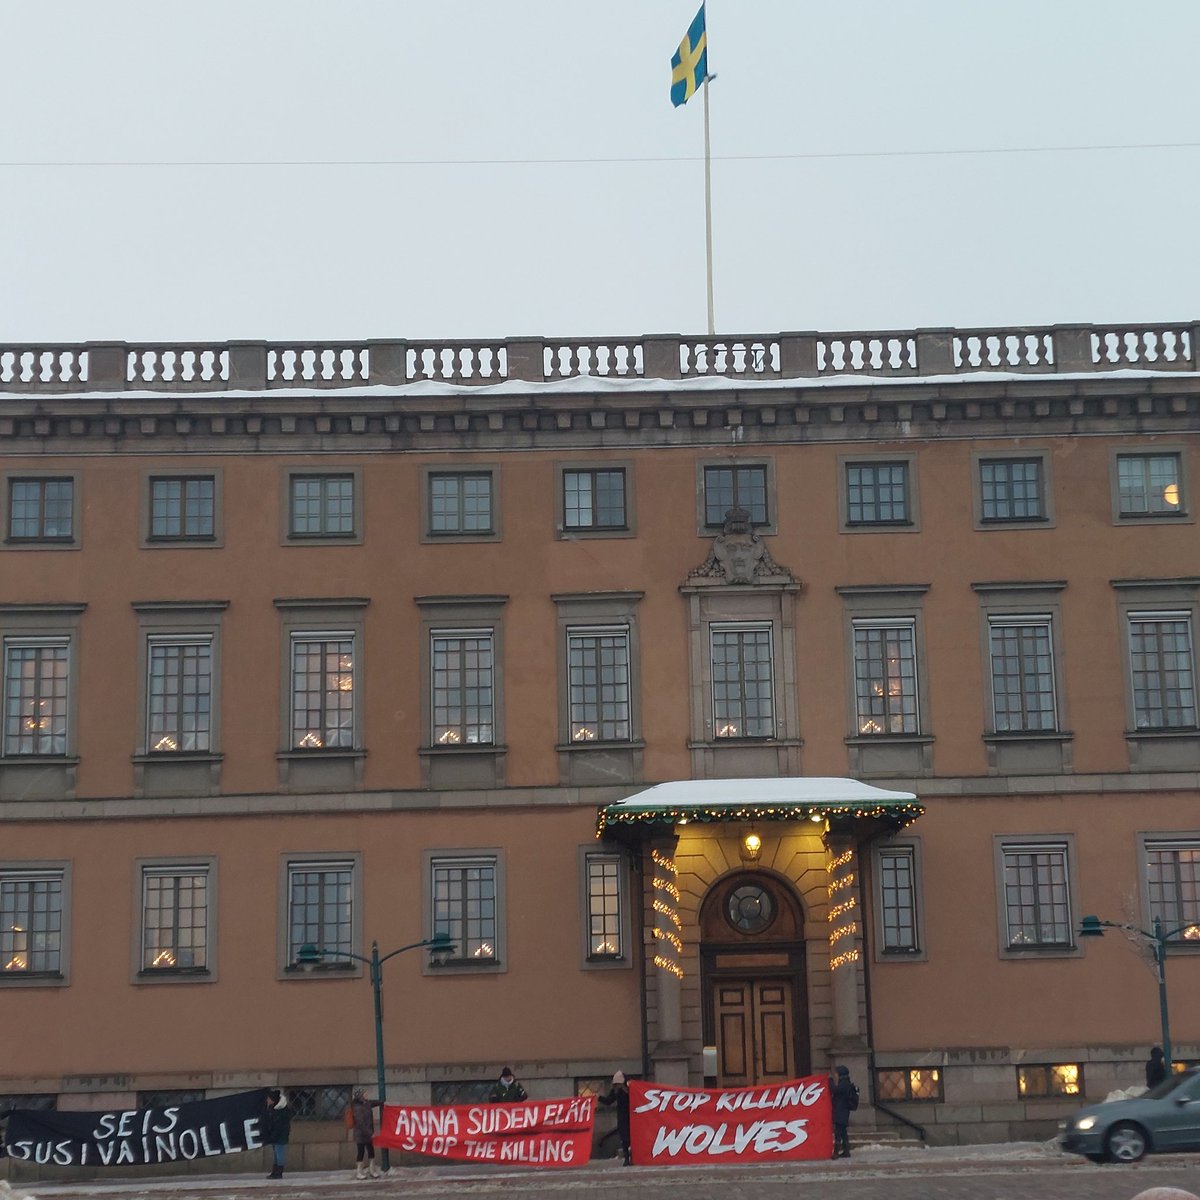 Anti wolf-cull protestors outside Swedish Embassy in Helsinki today. Sweden about to cull 73 wolves from a population of c.400. Already genetically fragmented & inbred, they need to expand not contract: #Sweden please listen to science: science.org/doi/10.1126/sc… 🐺 #wolves #COP15